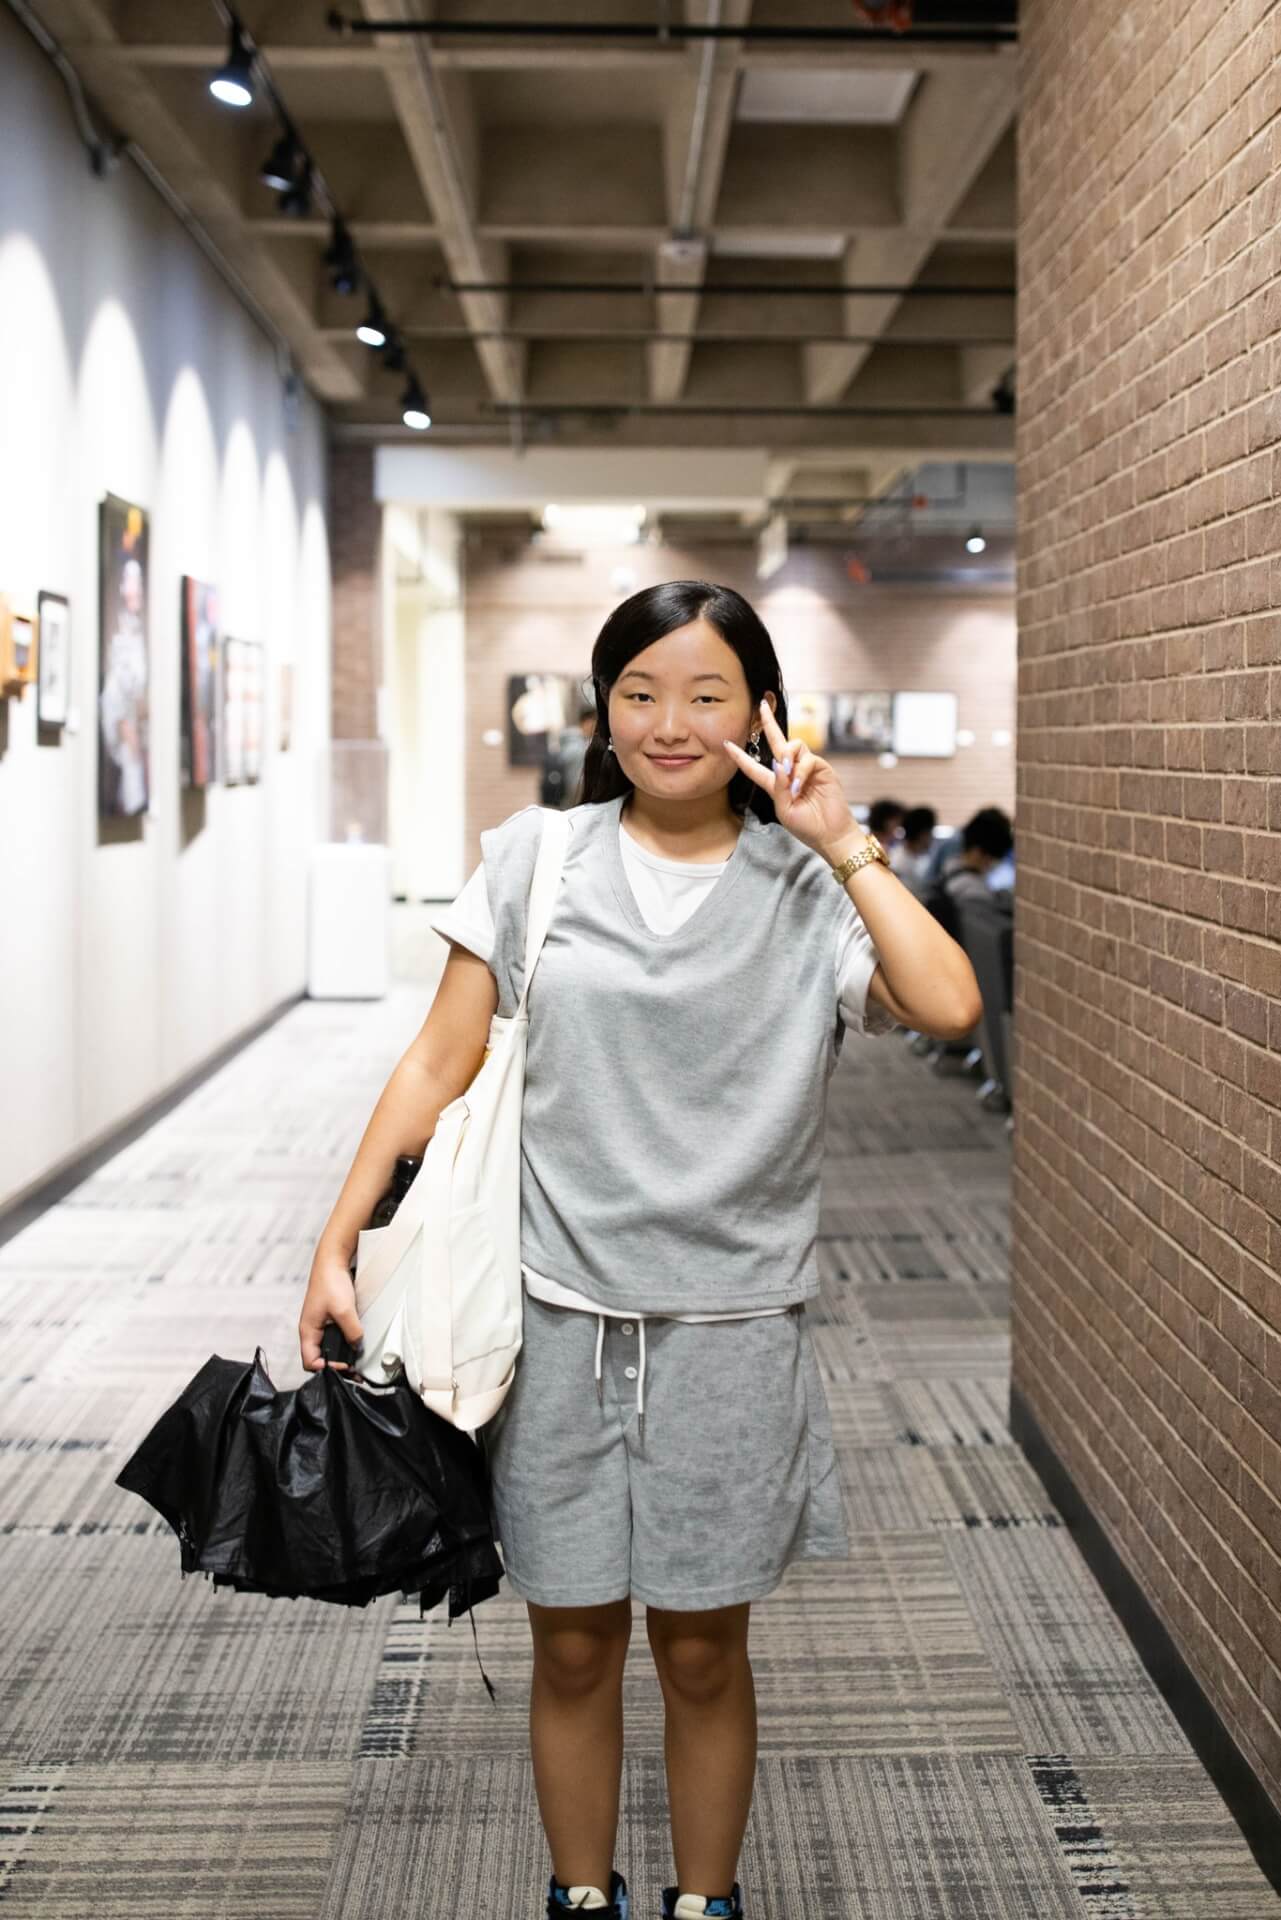 A woman in a gray shirt and shorts standing in an art gallery.